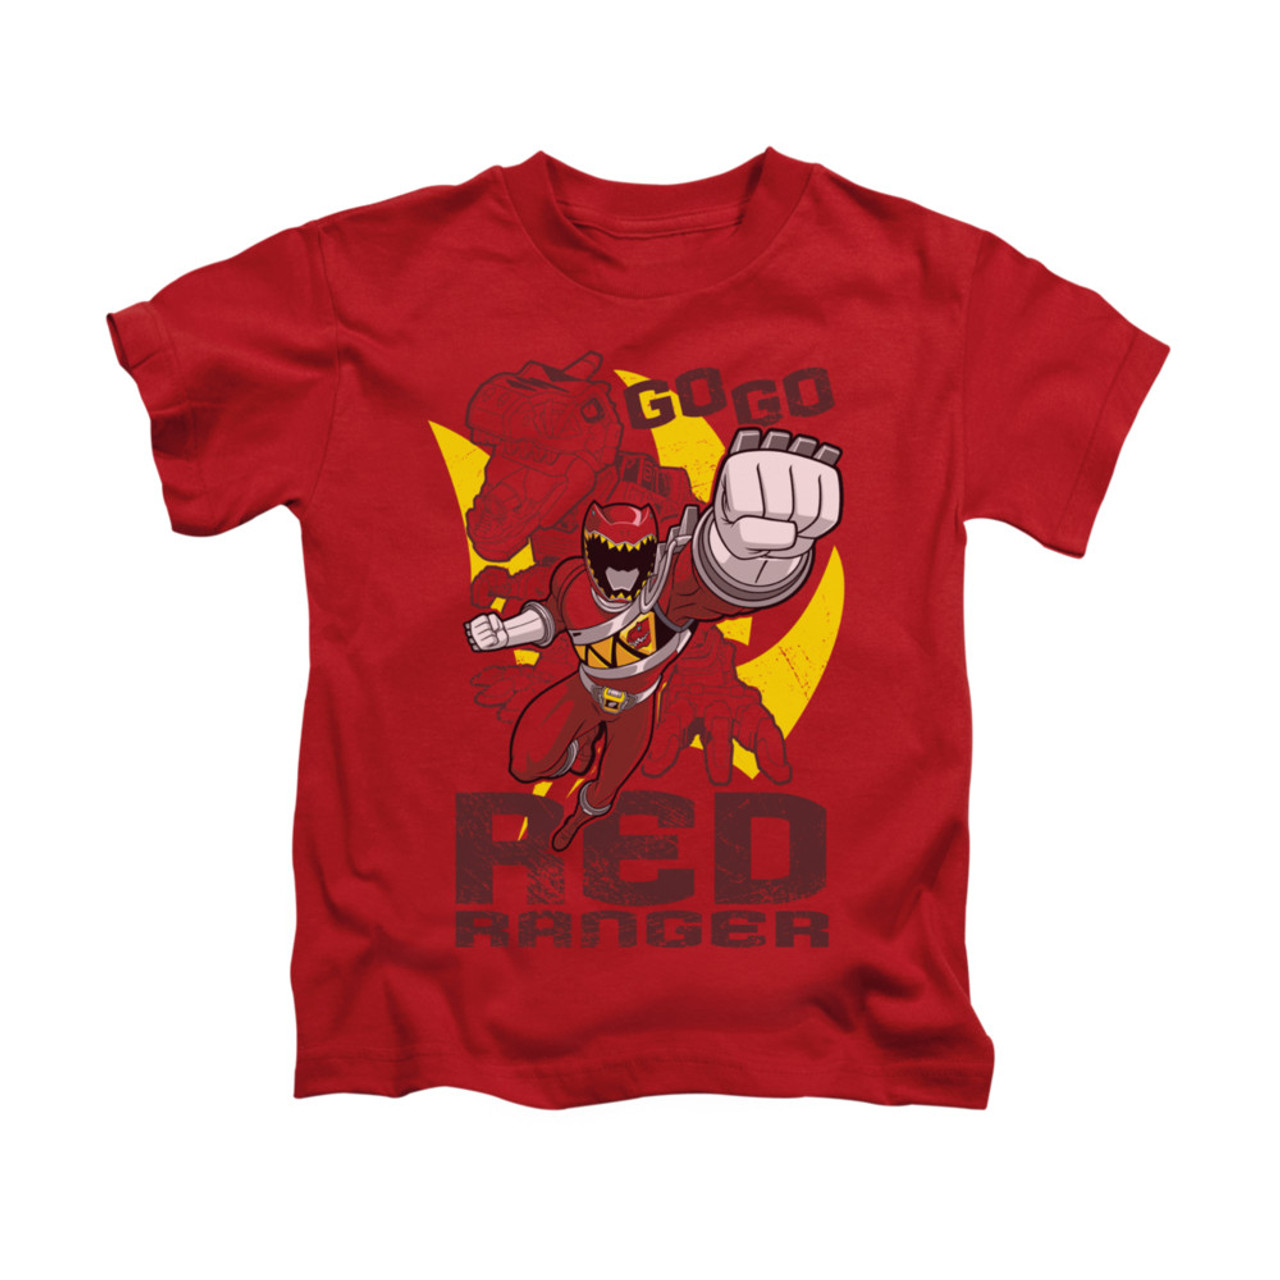 power ranger t shirts for toddlers